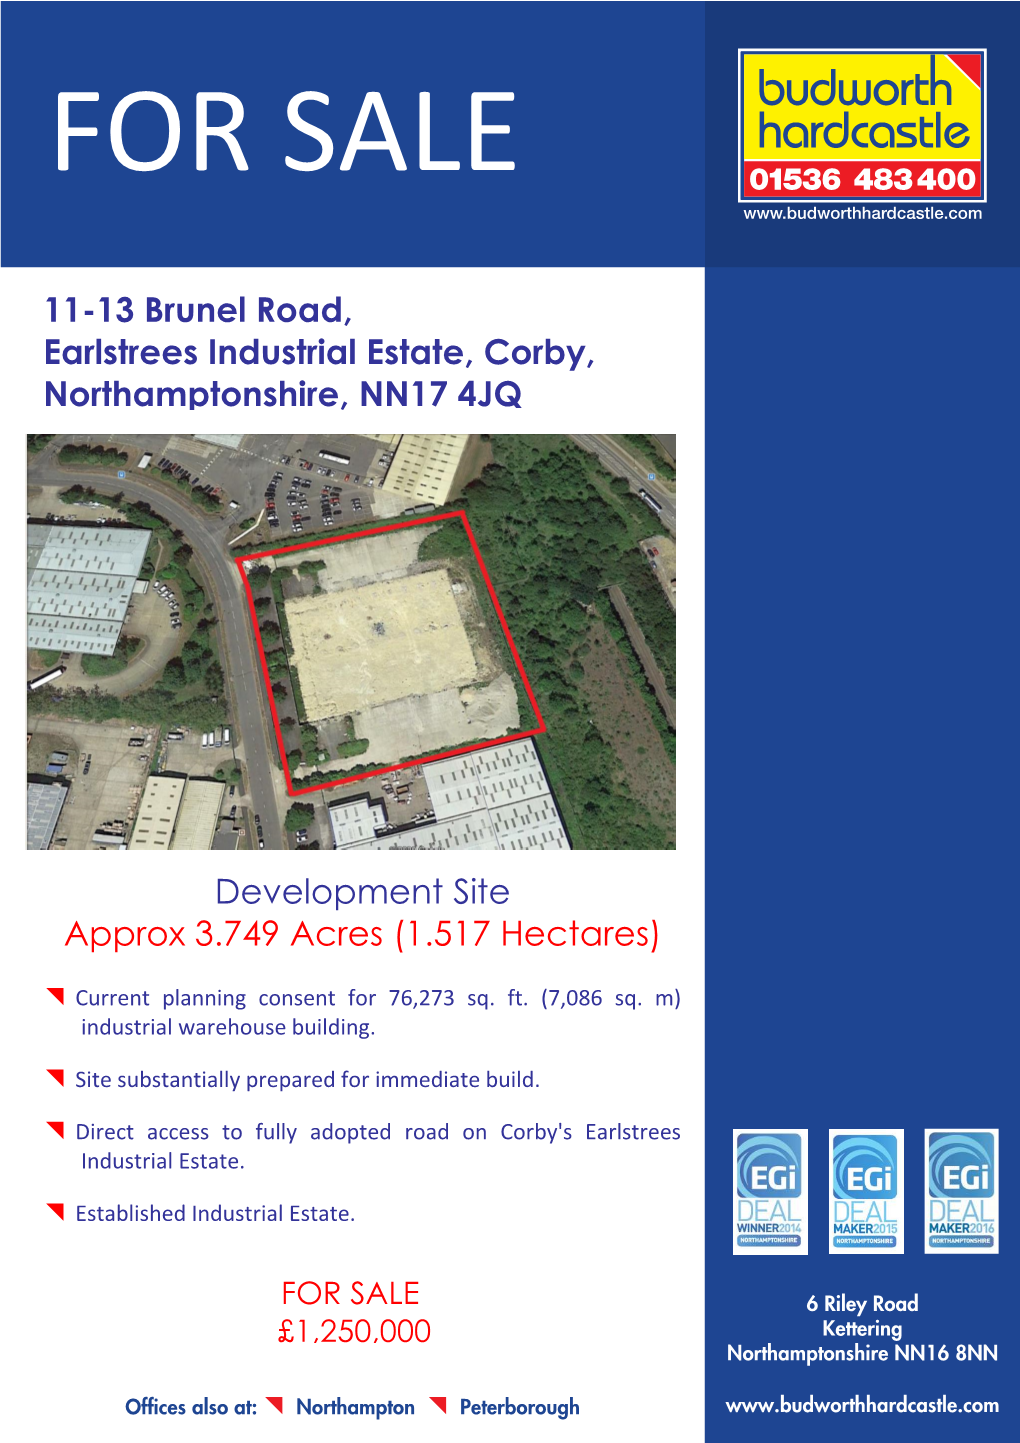 11-13 Brunel Road, Earlstrees Industrial Estate, Corby, Northamptonshire, NN17 4JQ Development Site Approx 3.749 Acres